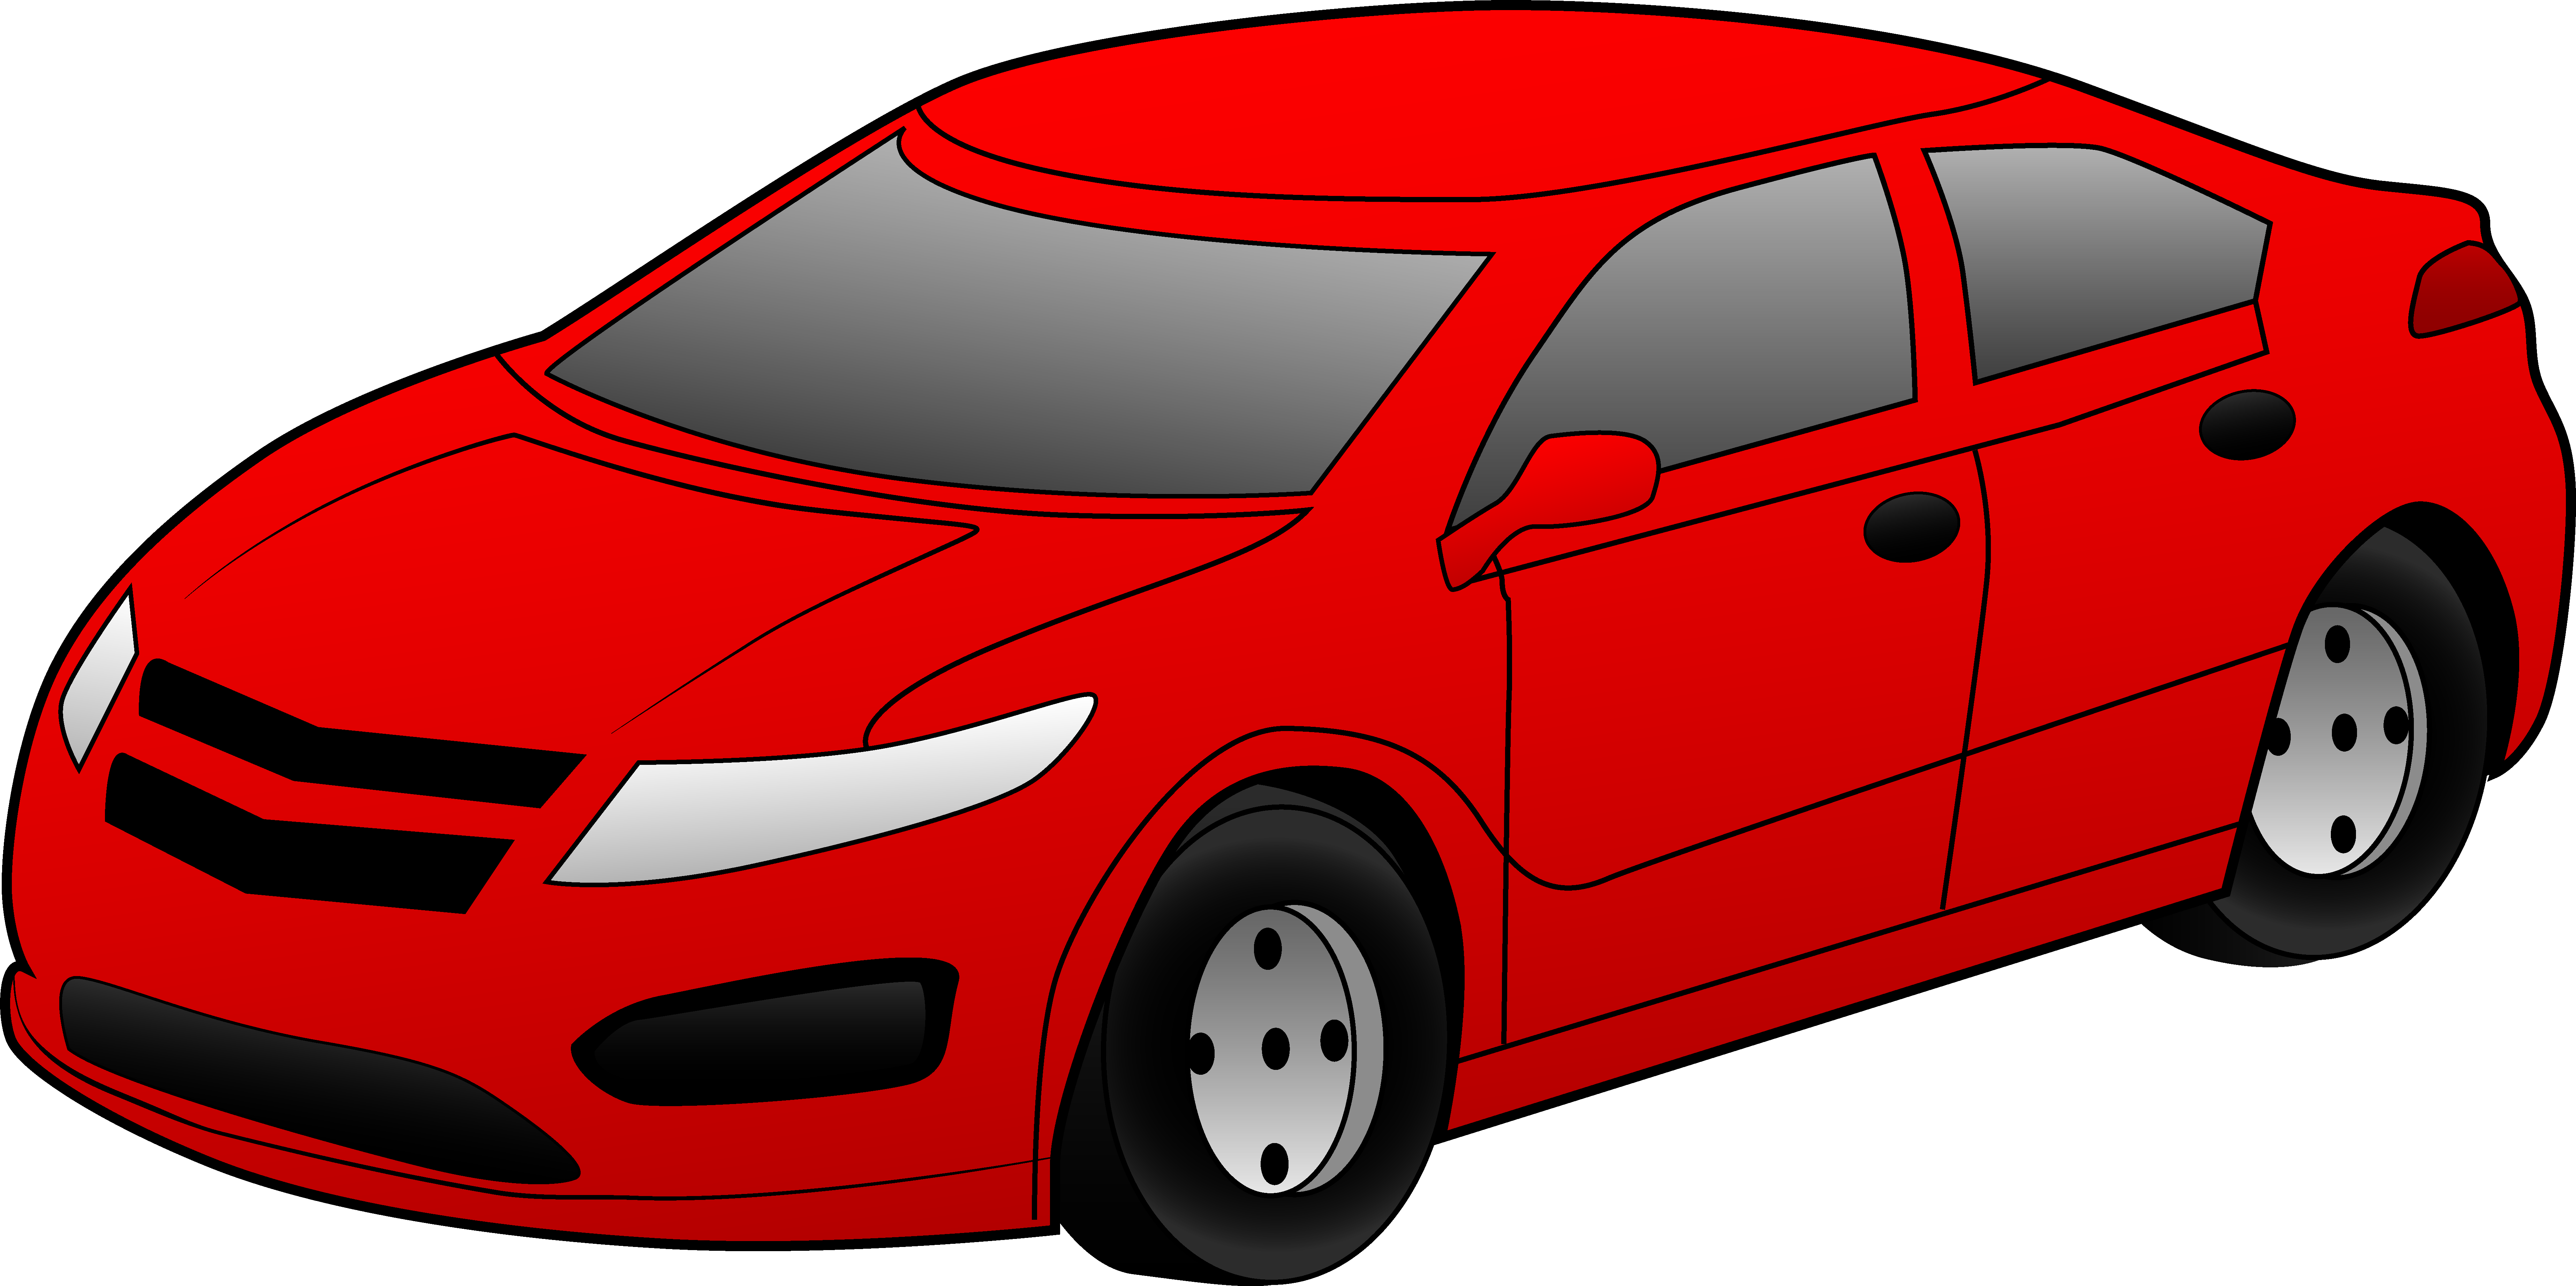 Black Sports Car Clipart - Free Clipart Images